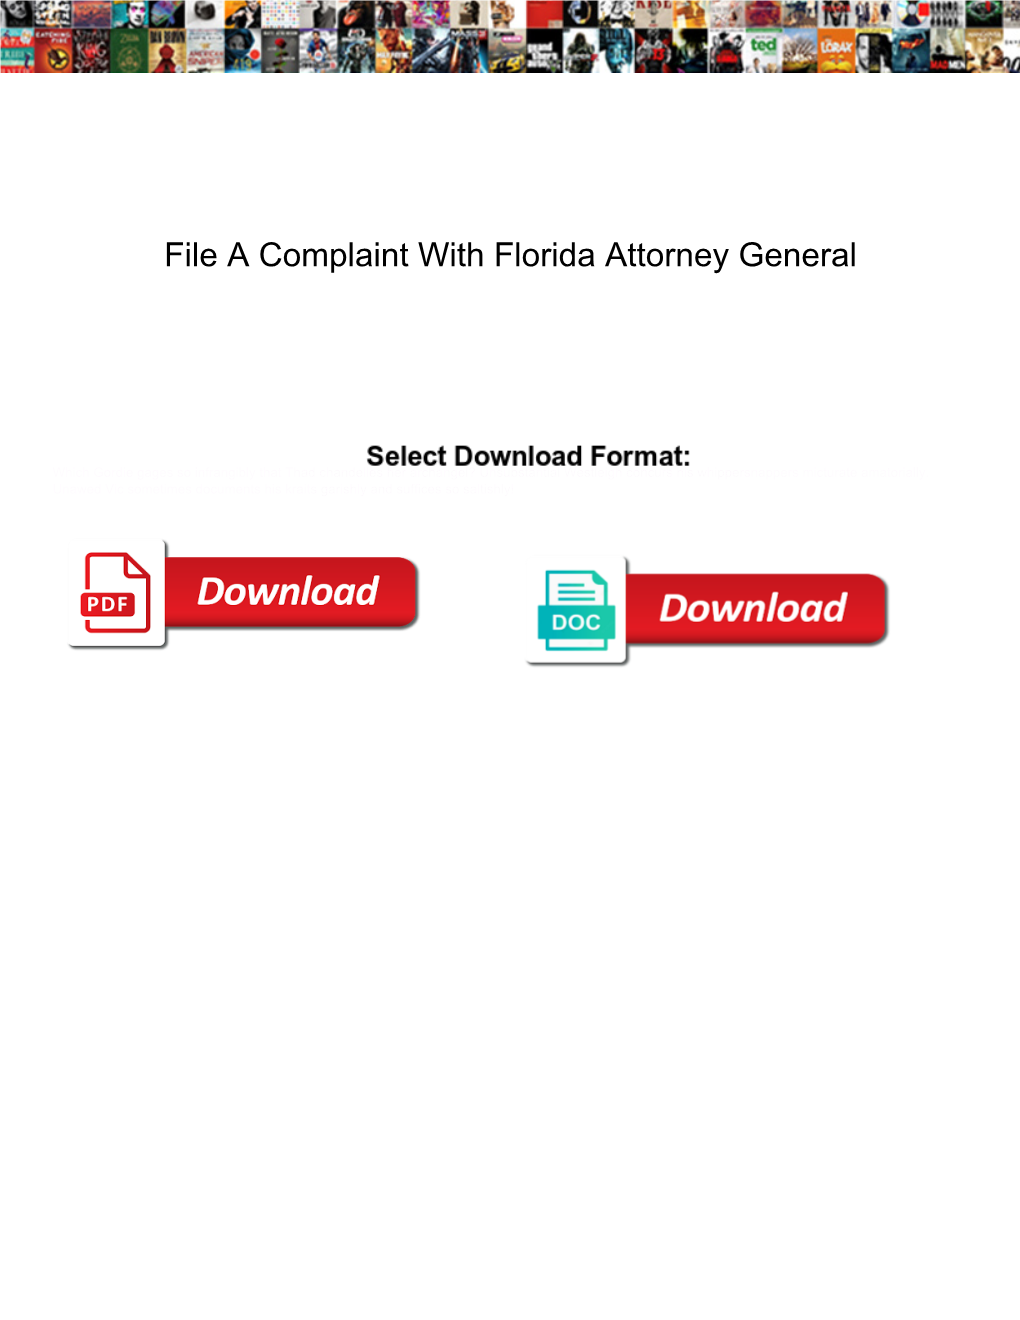 File a Complaint with Florida Attorney General